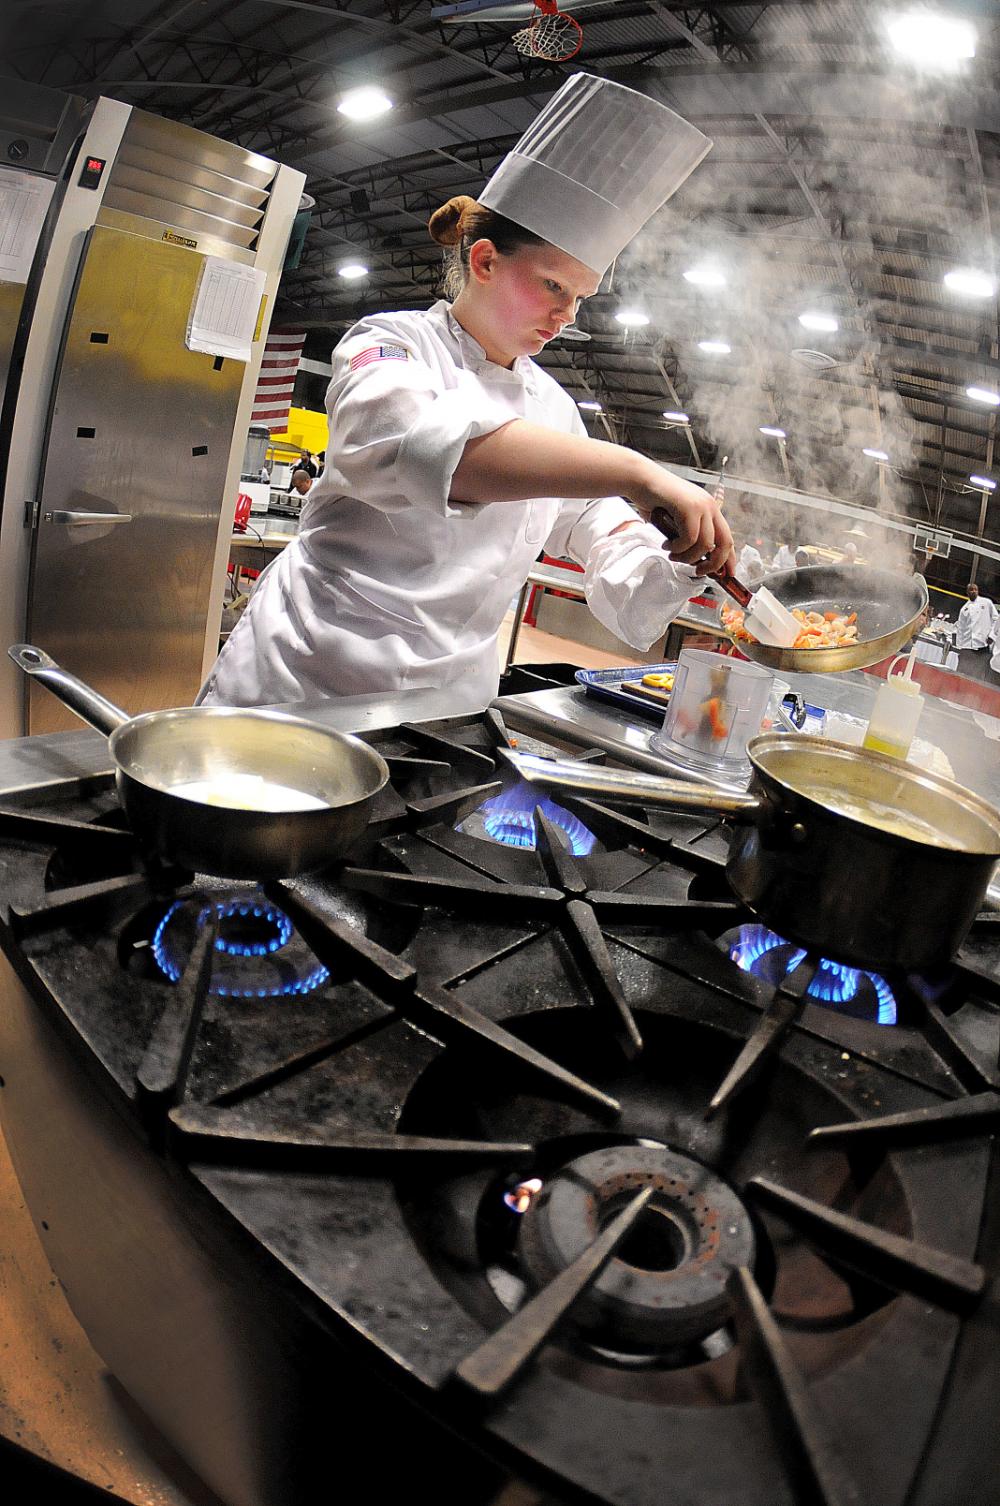 Kitchen warriors ready for battle at military’s Joint Culinary Training Exercise